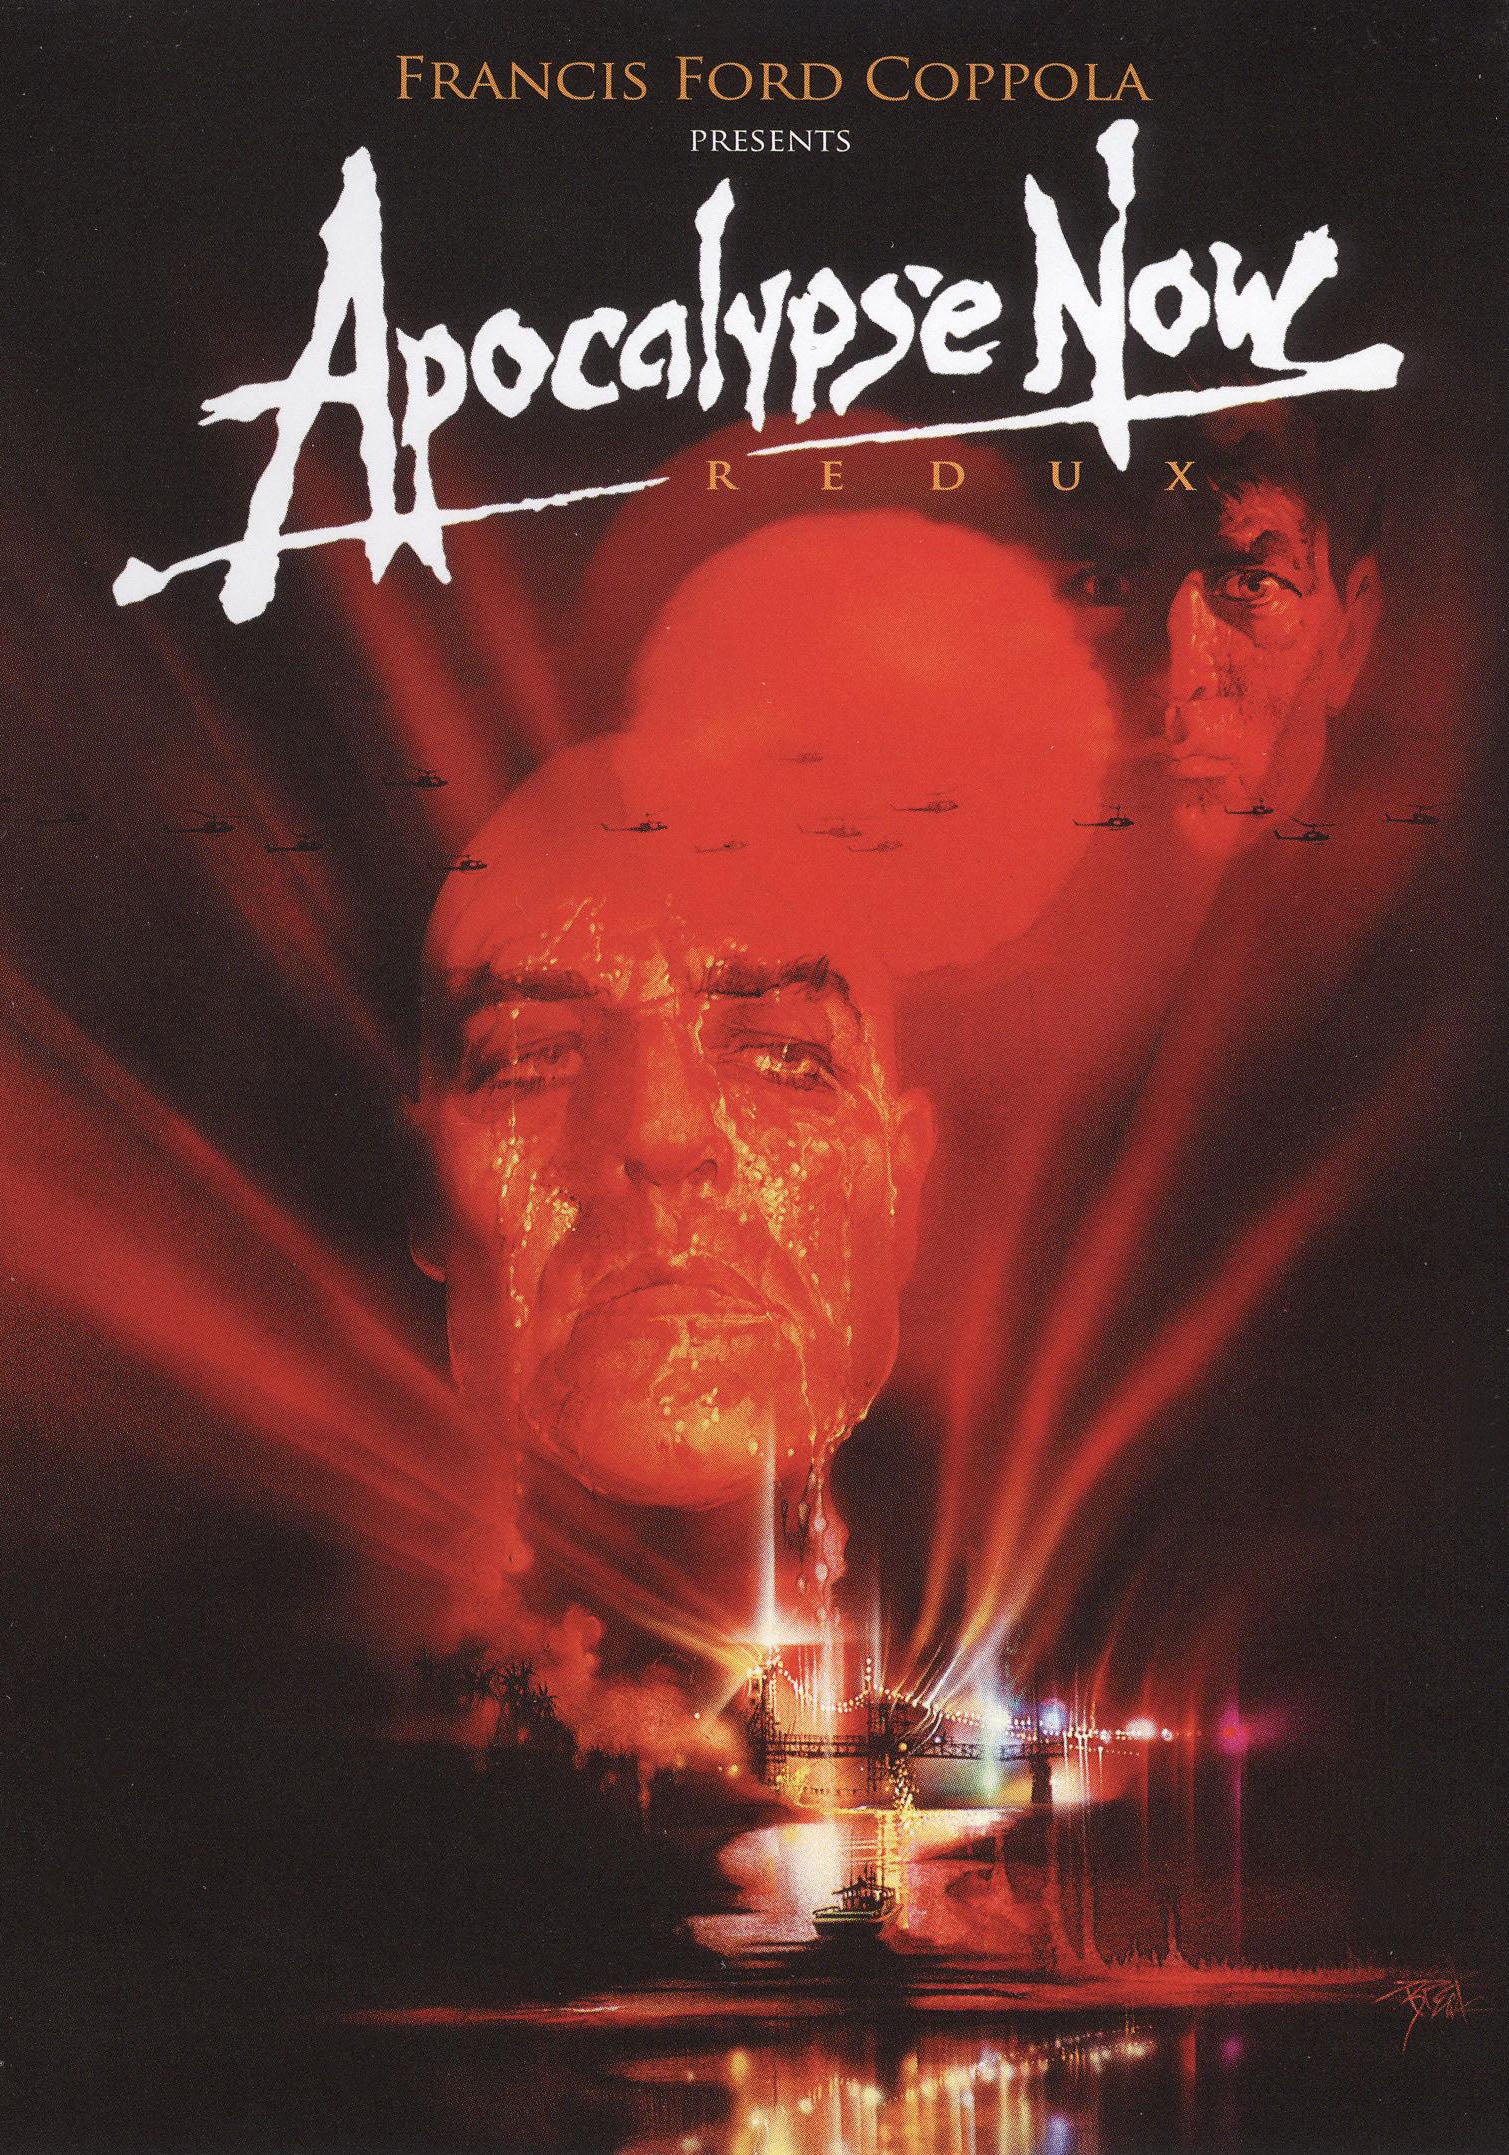 Apocalypse Now Redux [Retro Poster Packaging] cover art